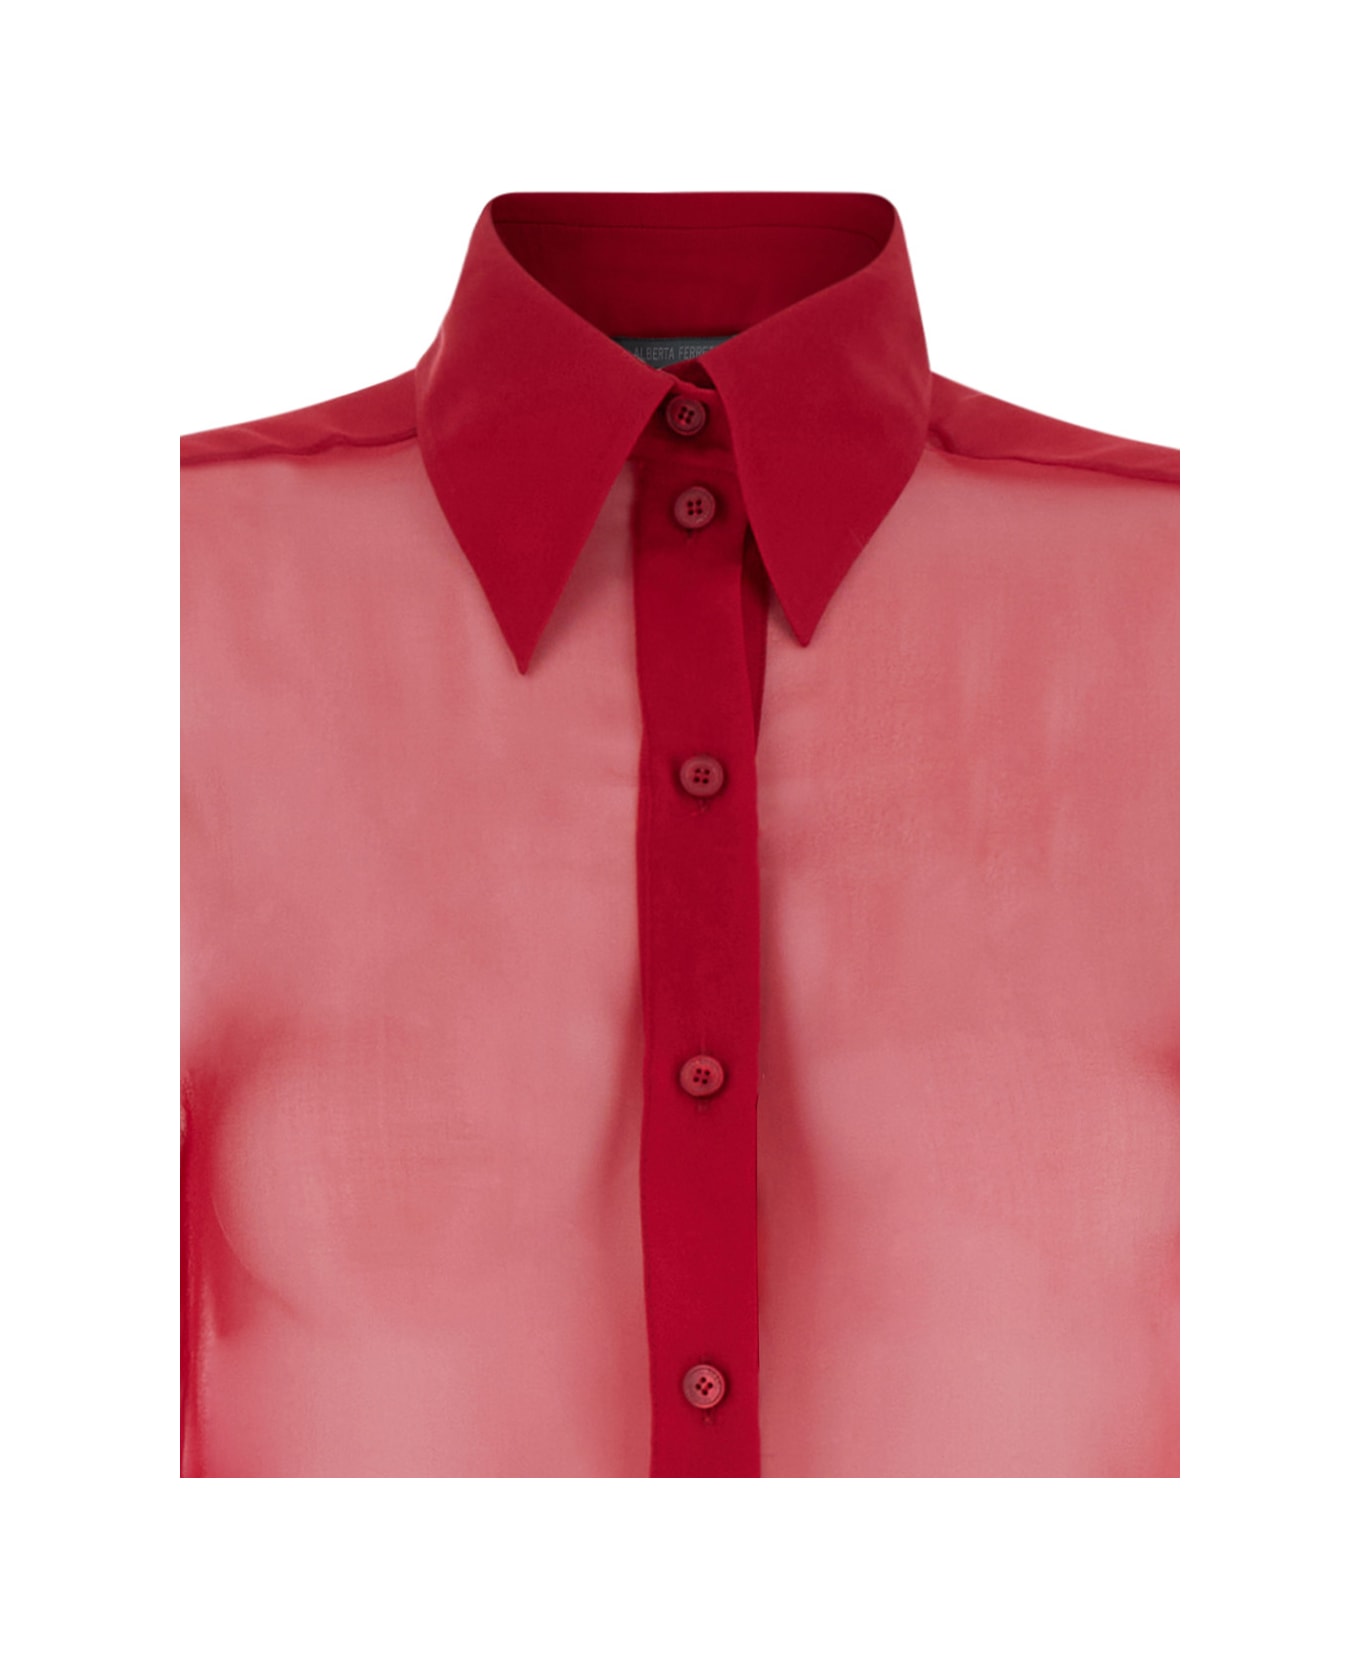 Alberta Ferretti Red Shirt With Pointed Collar In Chiffon Woman - Pink